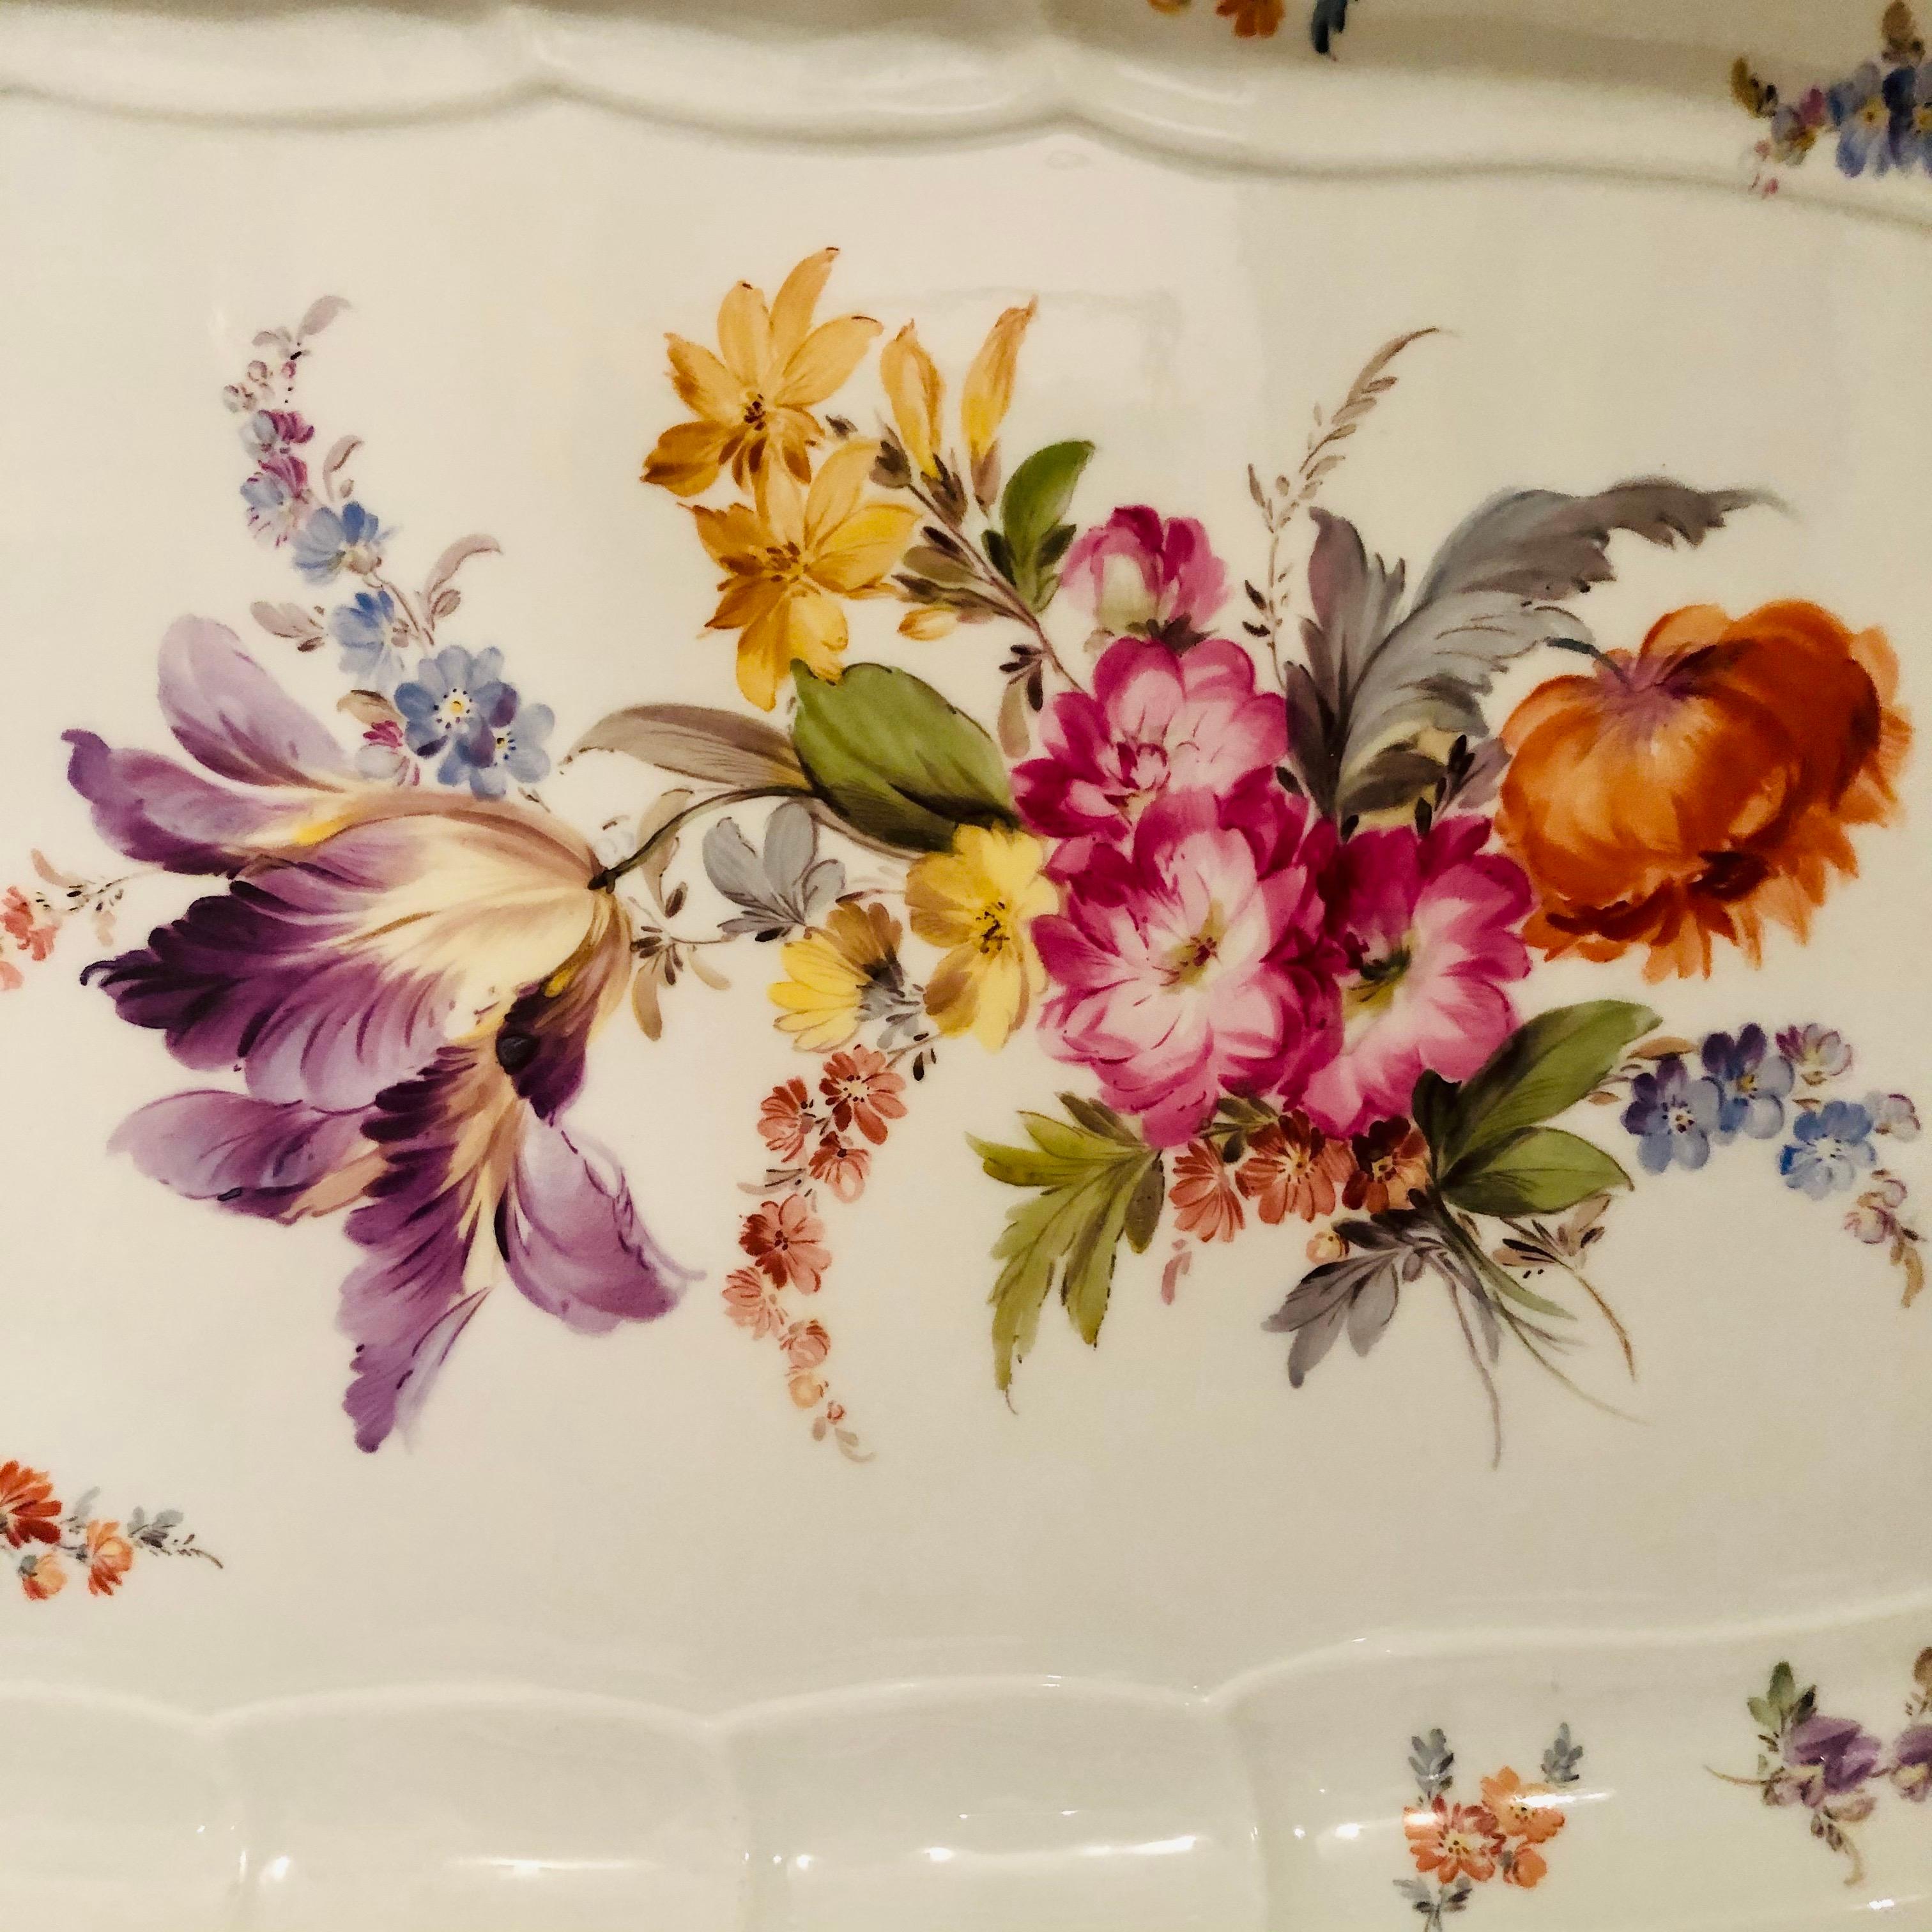 I want to offer you this beautifully painted antique Meissen fish platter that is in the New Brandenstein pattern. The Meissen platter is painted with a large bouquet of flowers including a gorgeous purple Rembrandt tulip surrounded by other flowers